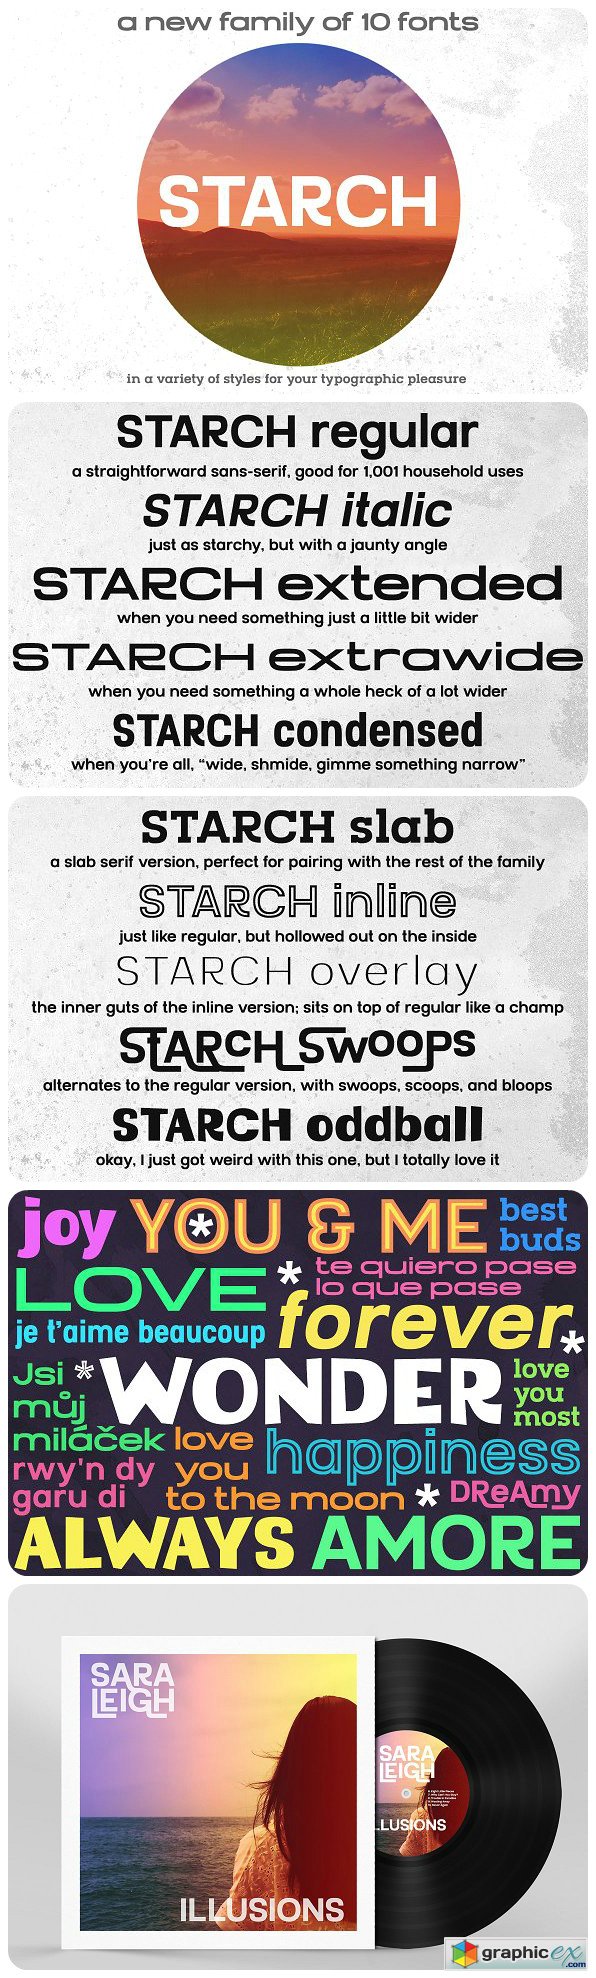 STARCH font family